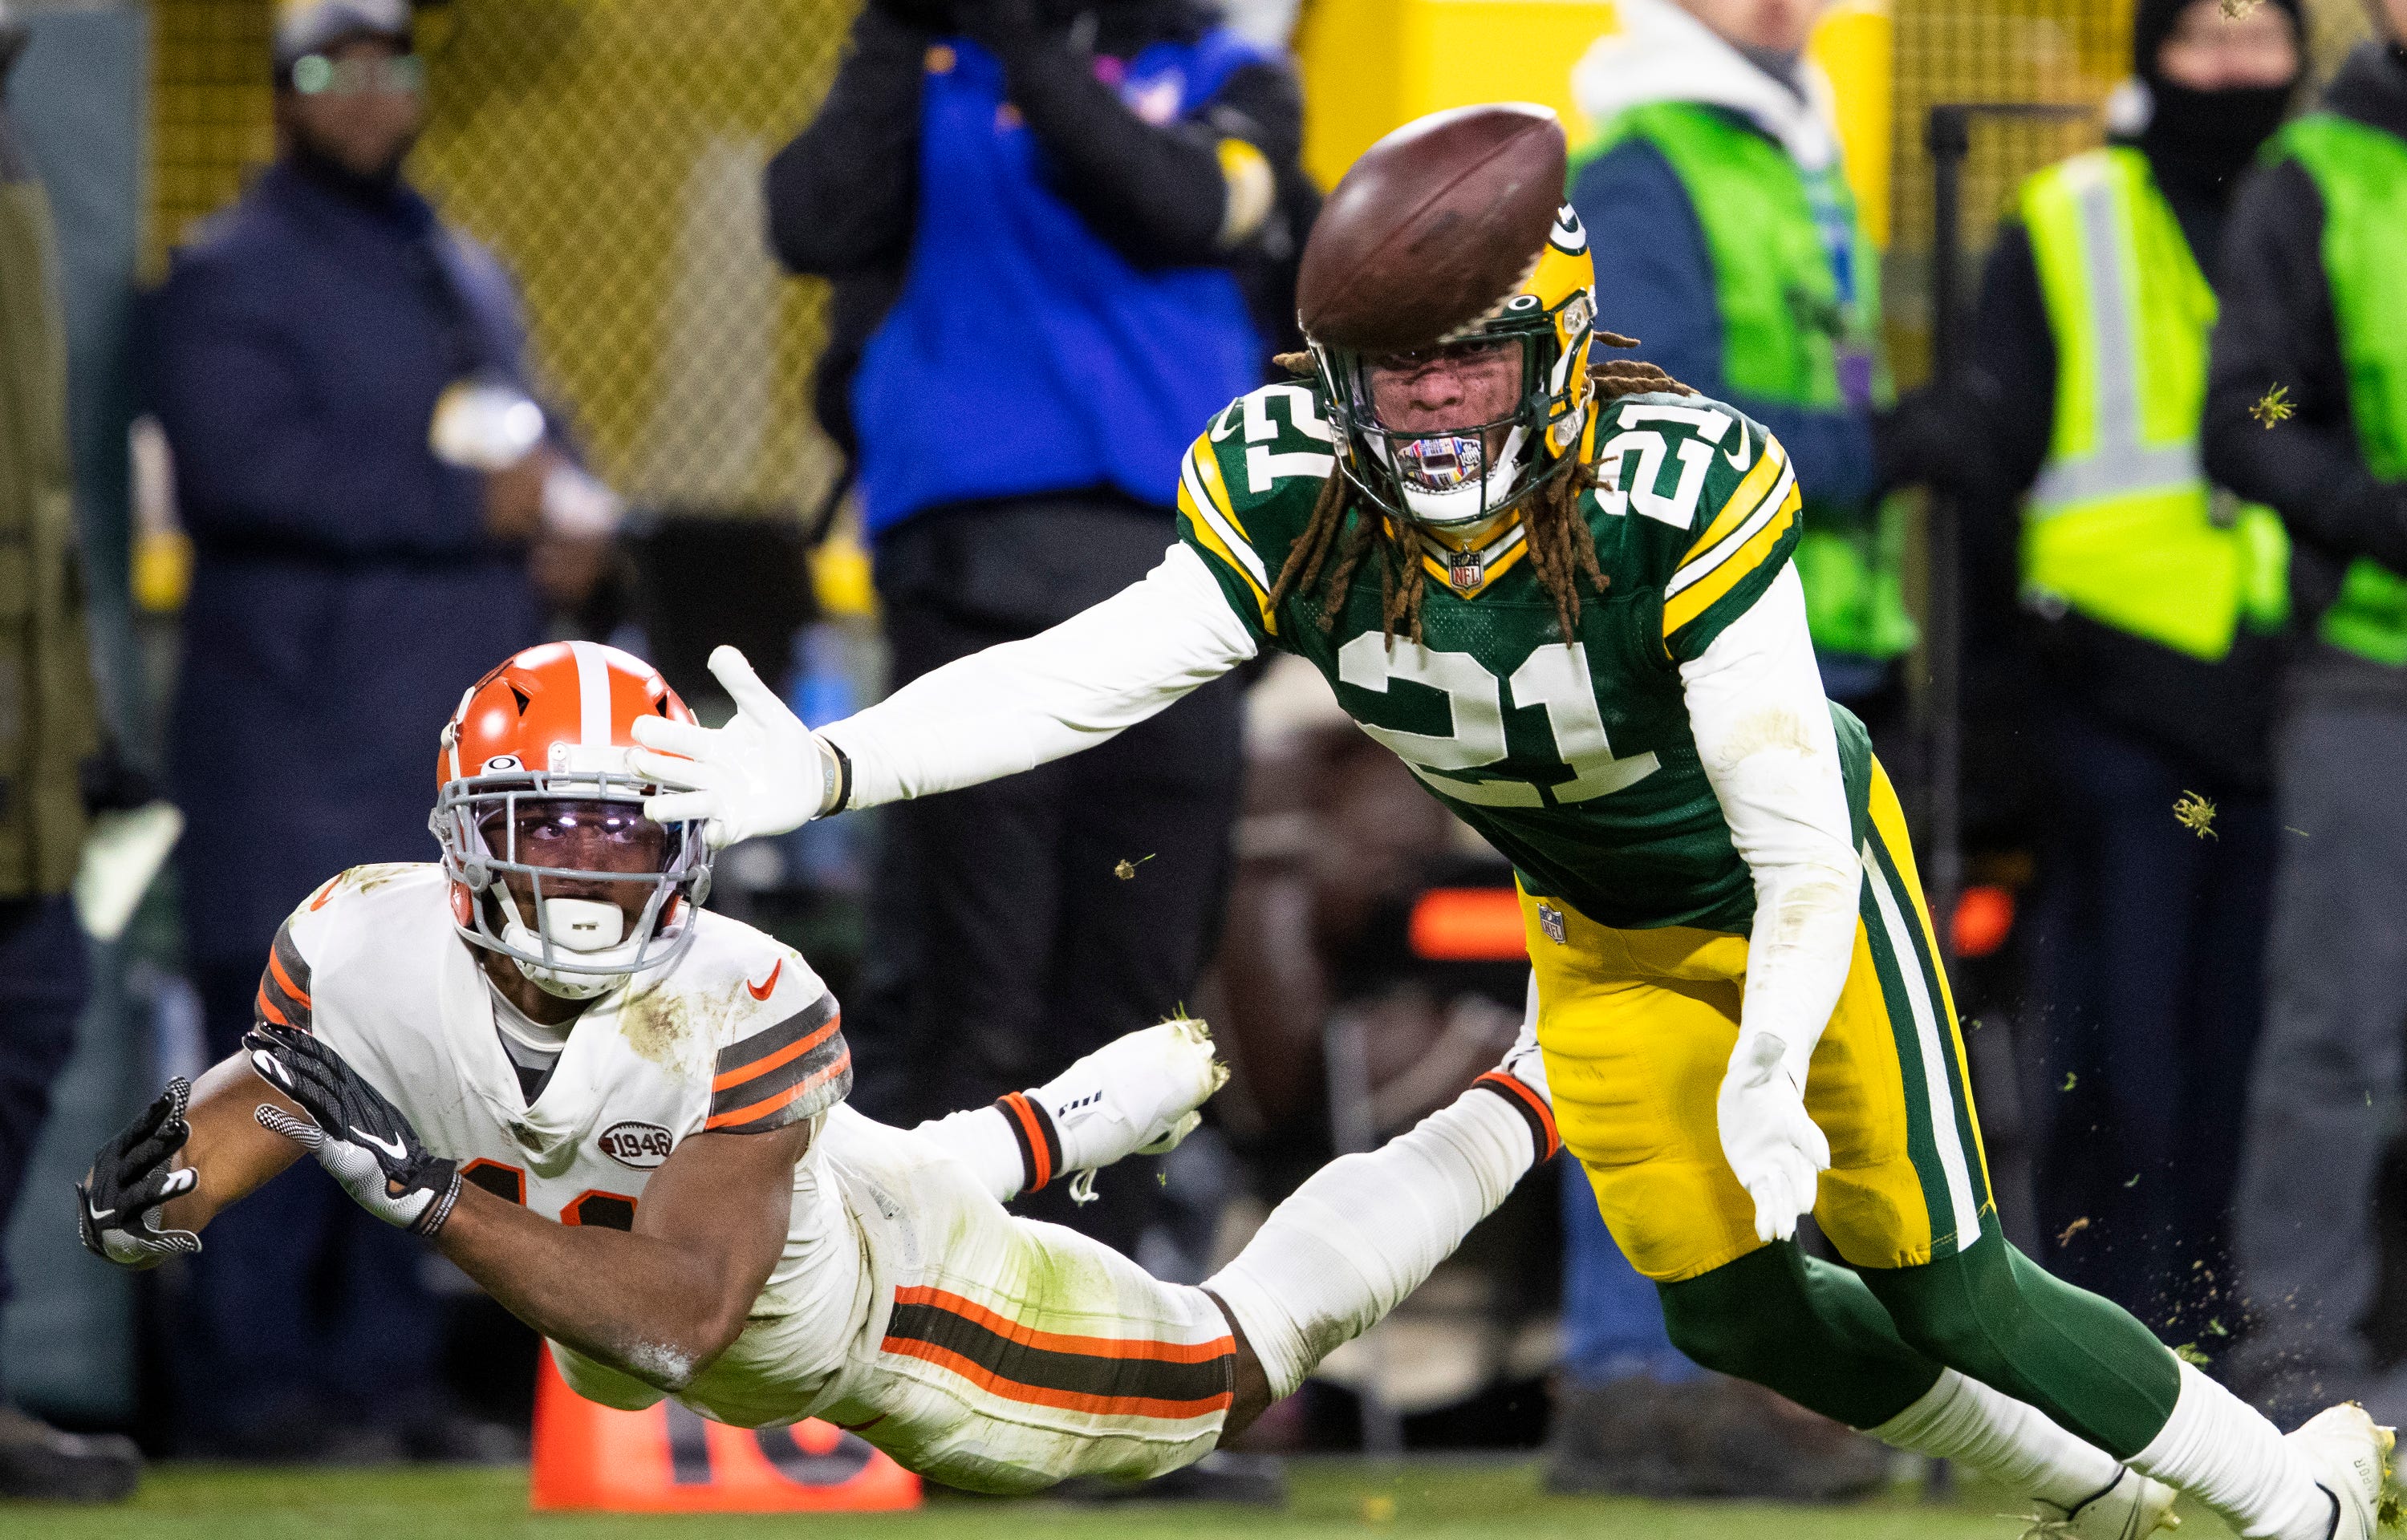 Syndication: PackersNews